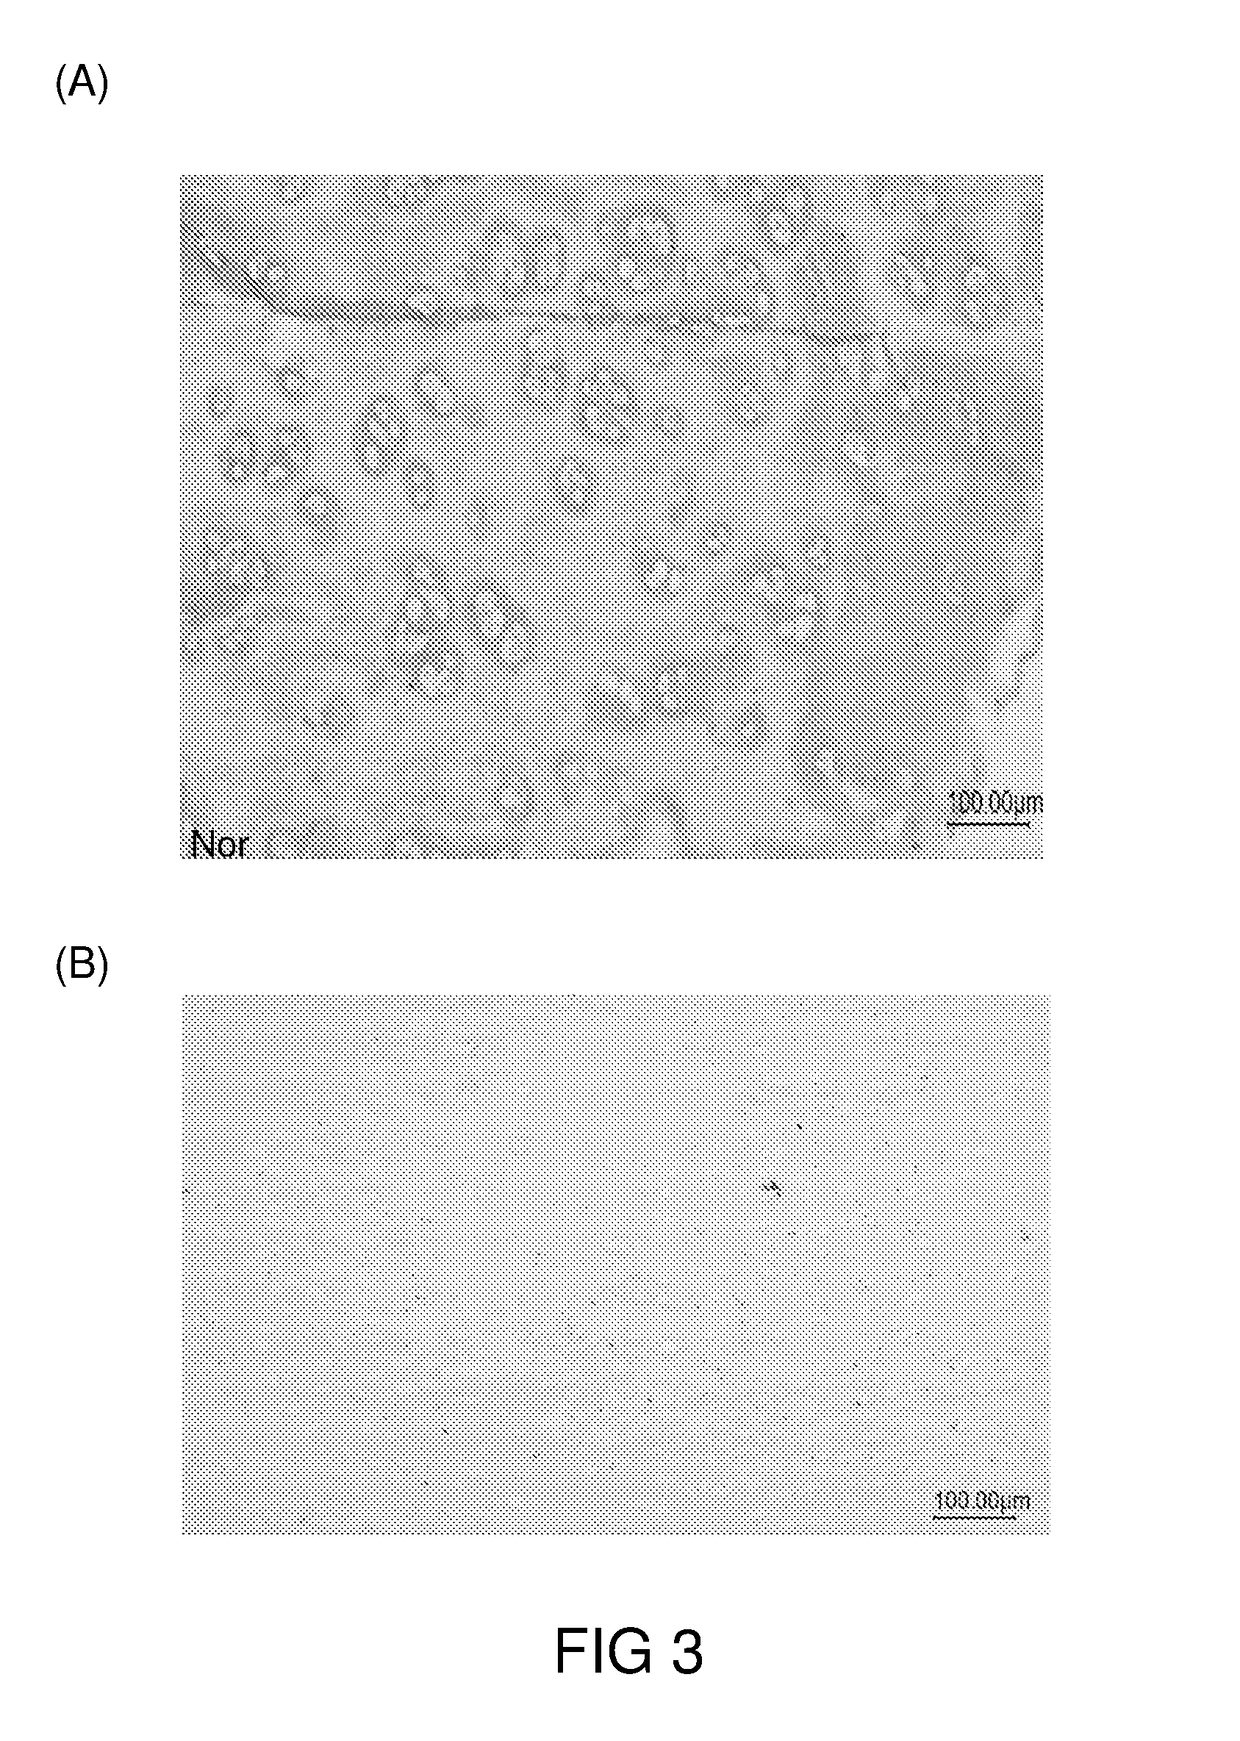 Preparation of acellular cartilage graft and uses thereof